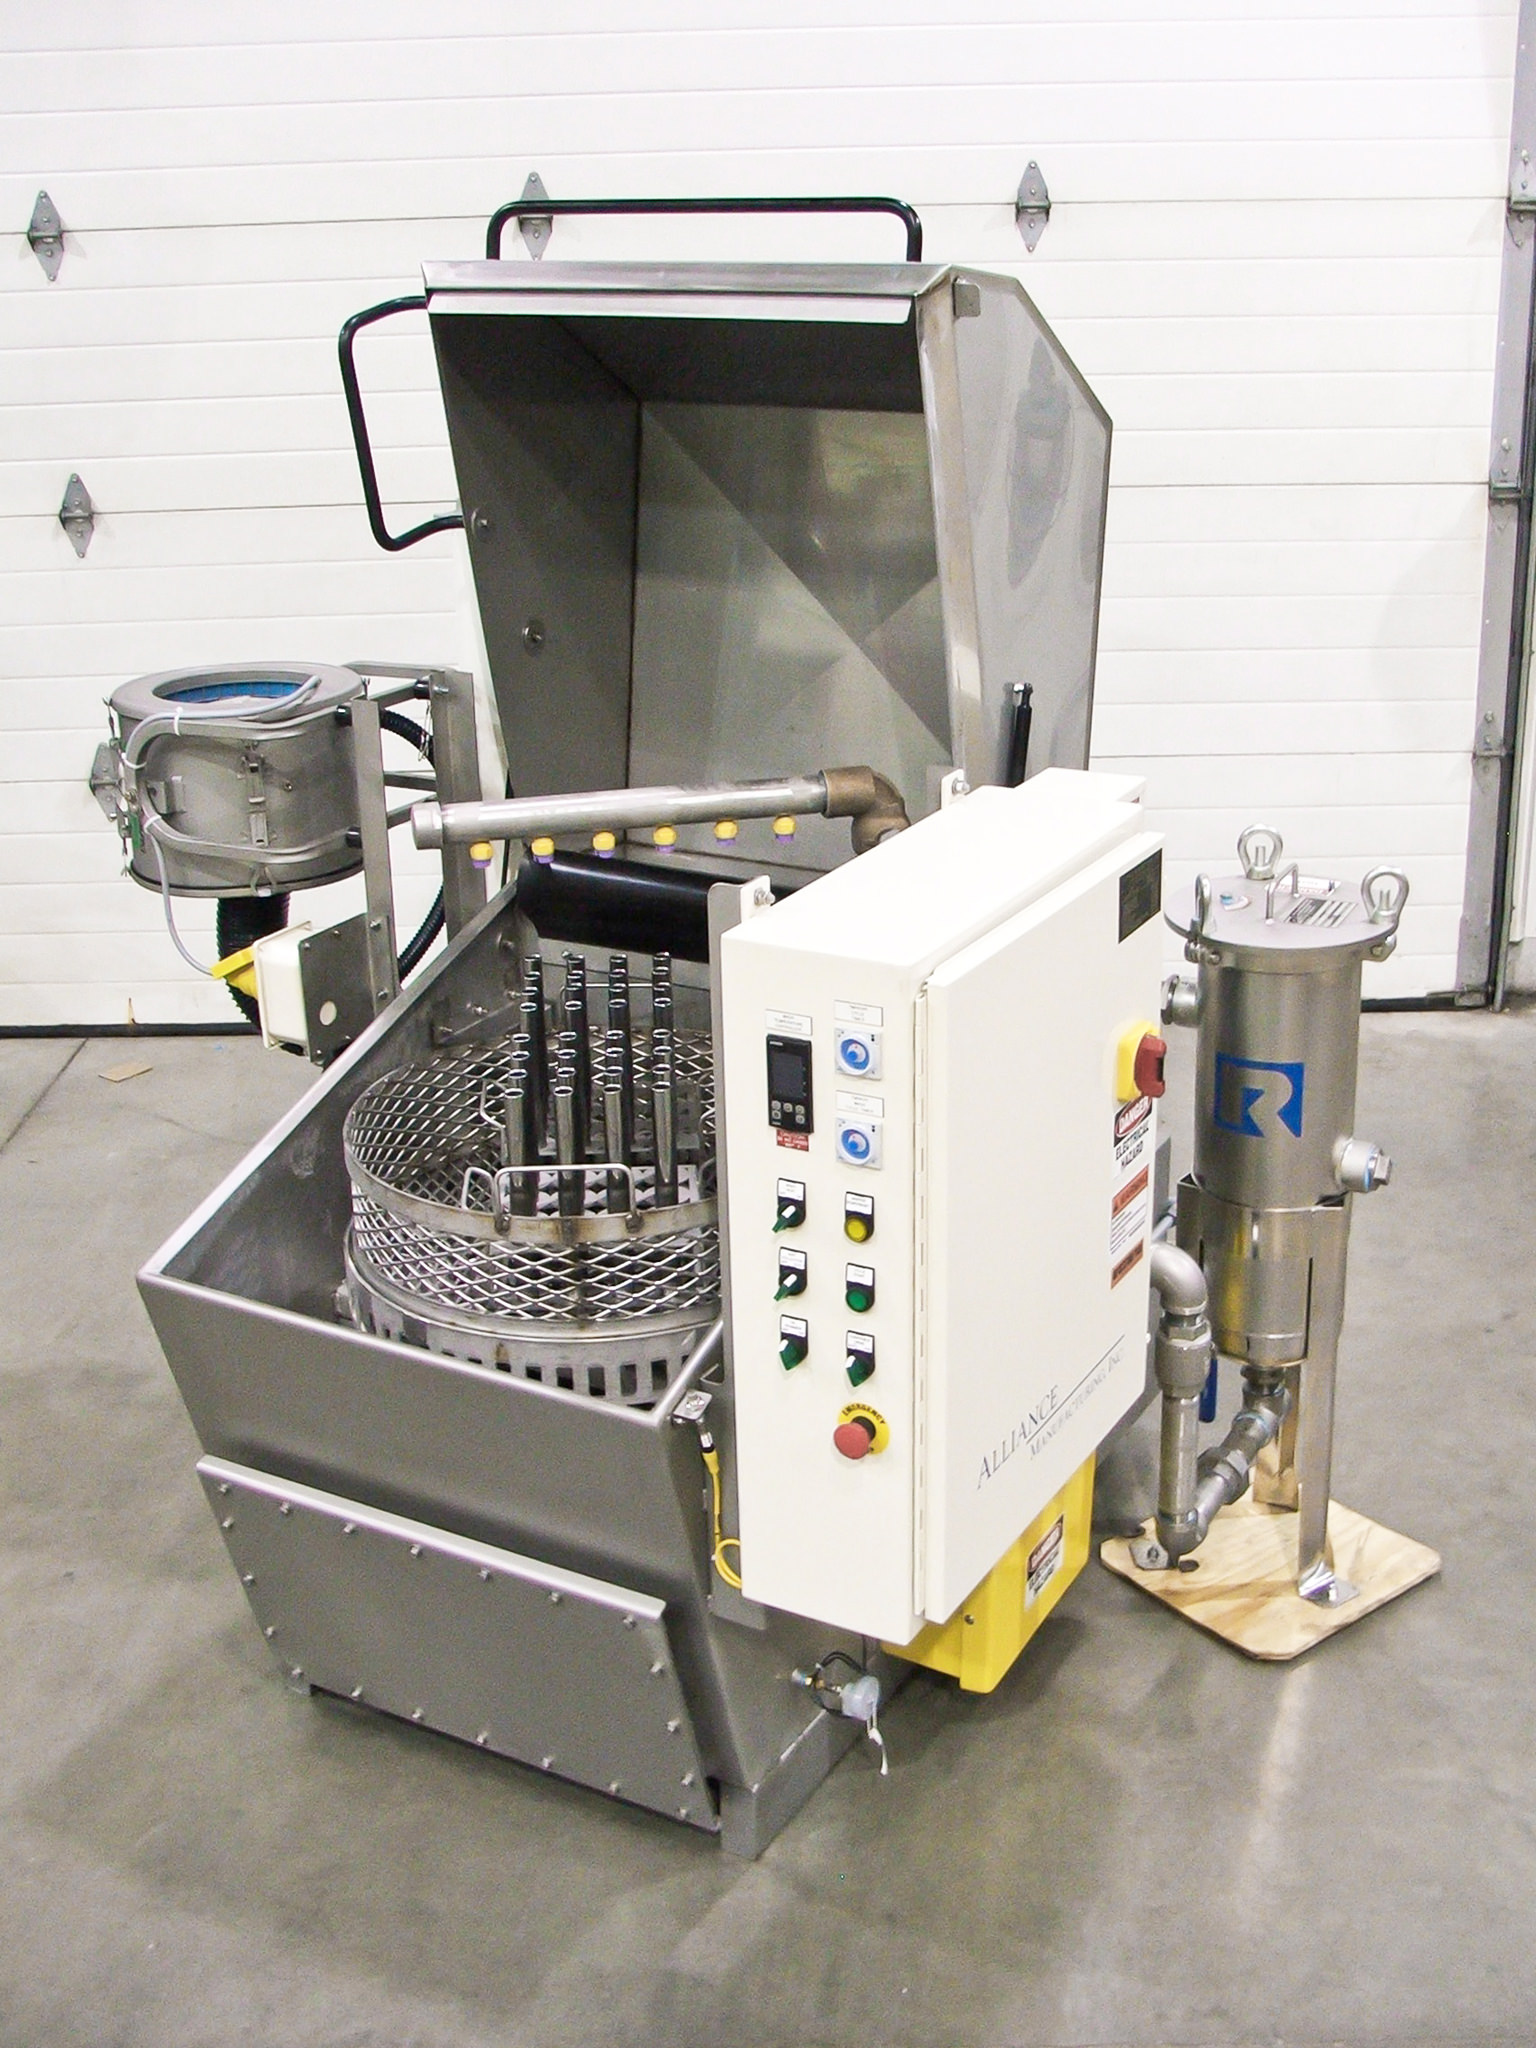 Batch washer for swaging tubes